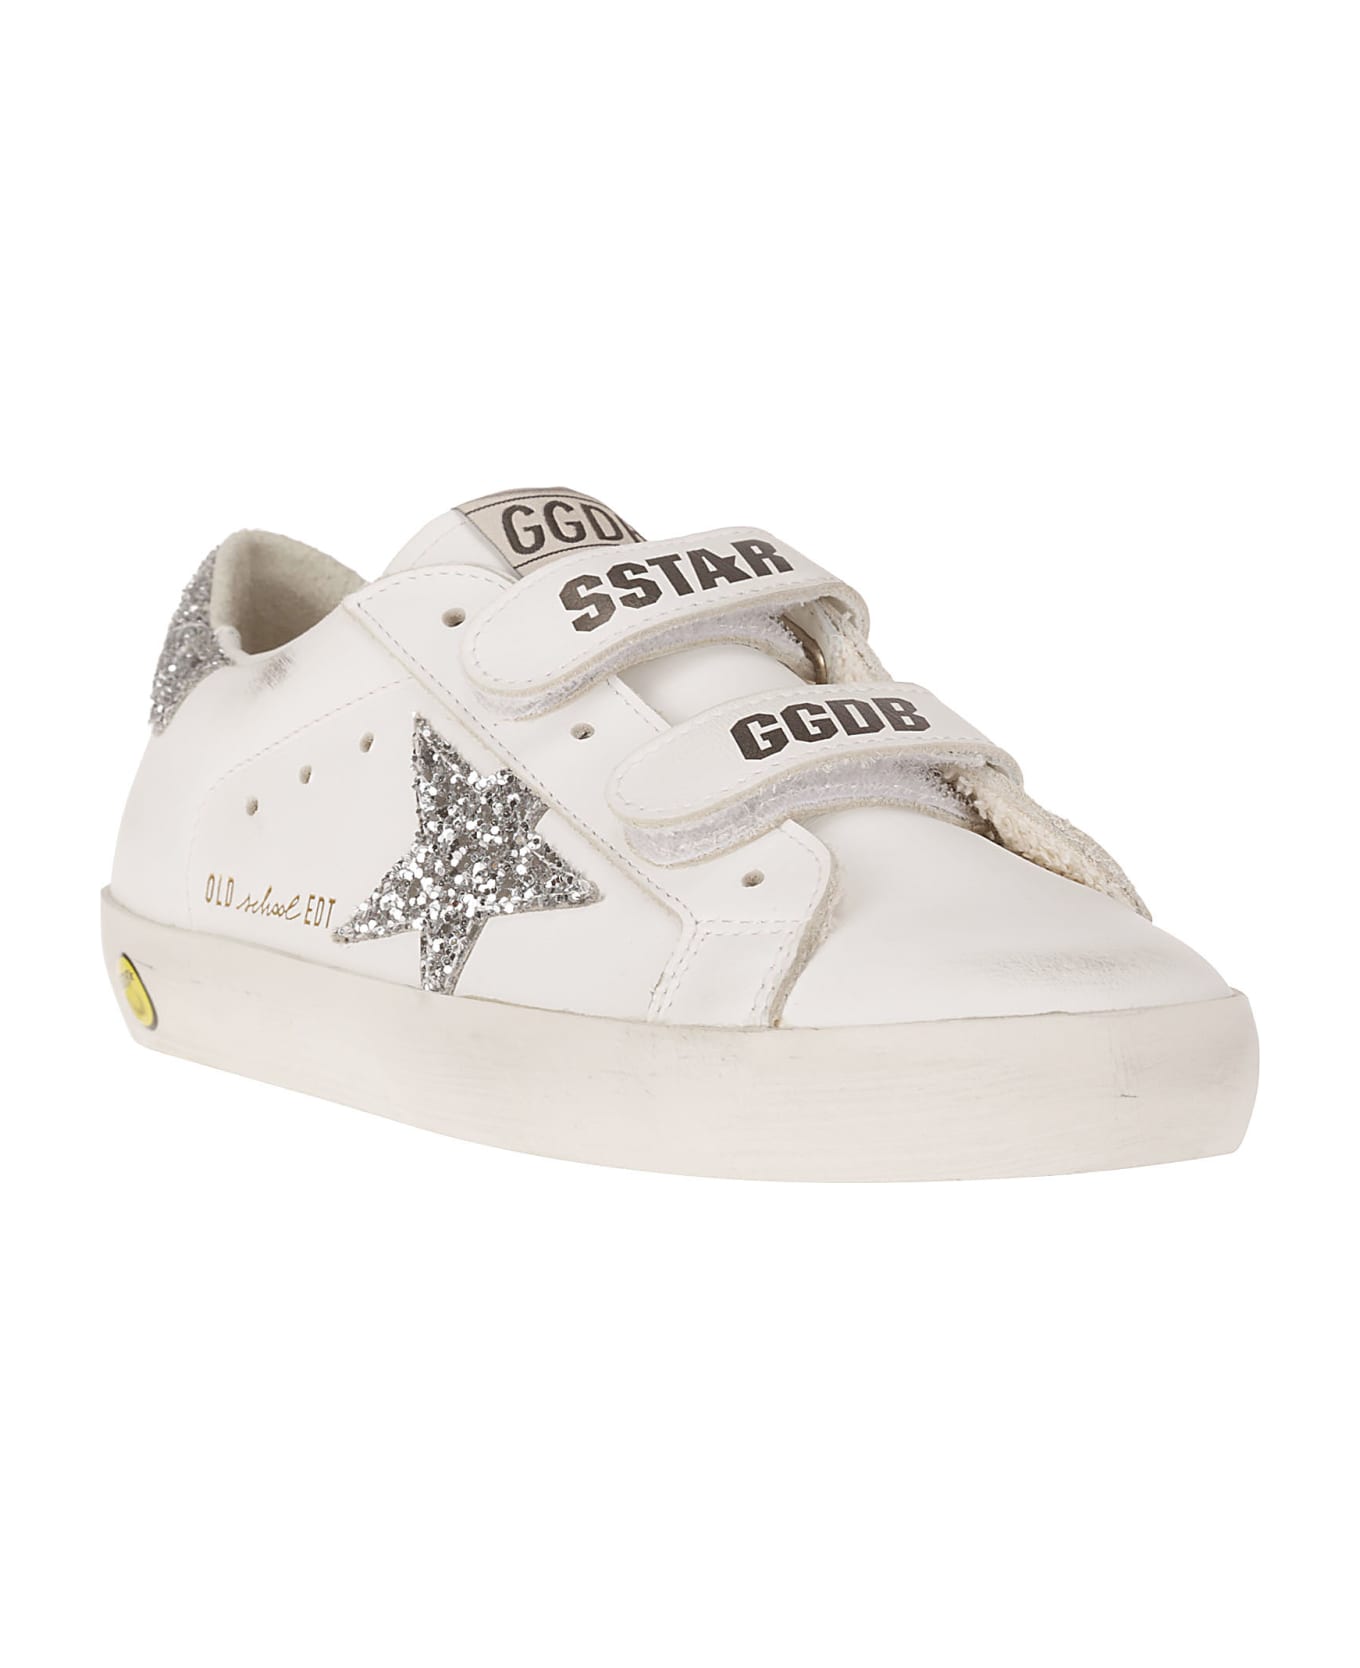 Golden Goose Old School Leather Upper Suede Toe Glitter Star - WHITE/ICE/SILVER